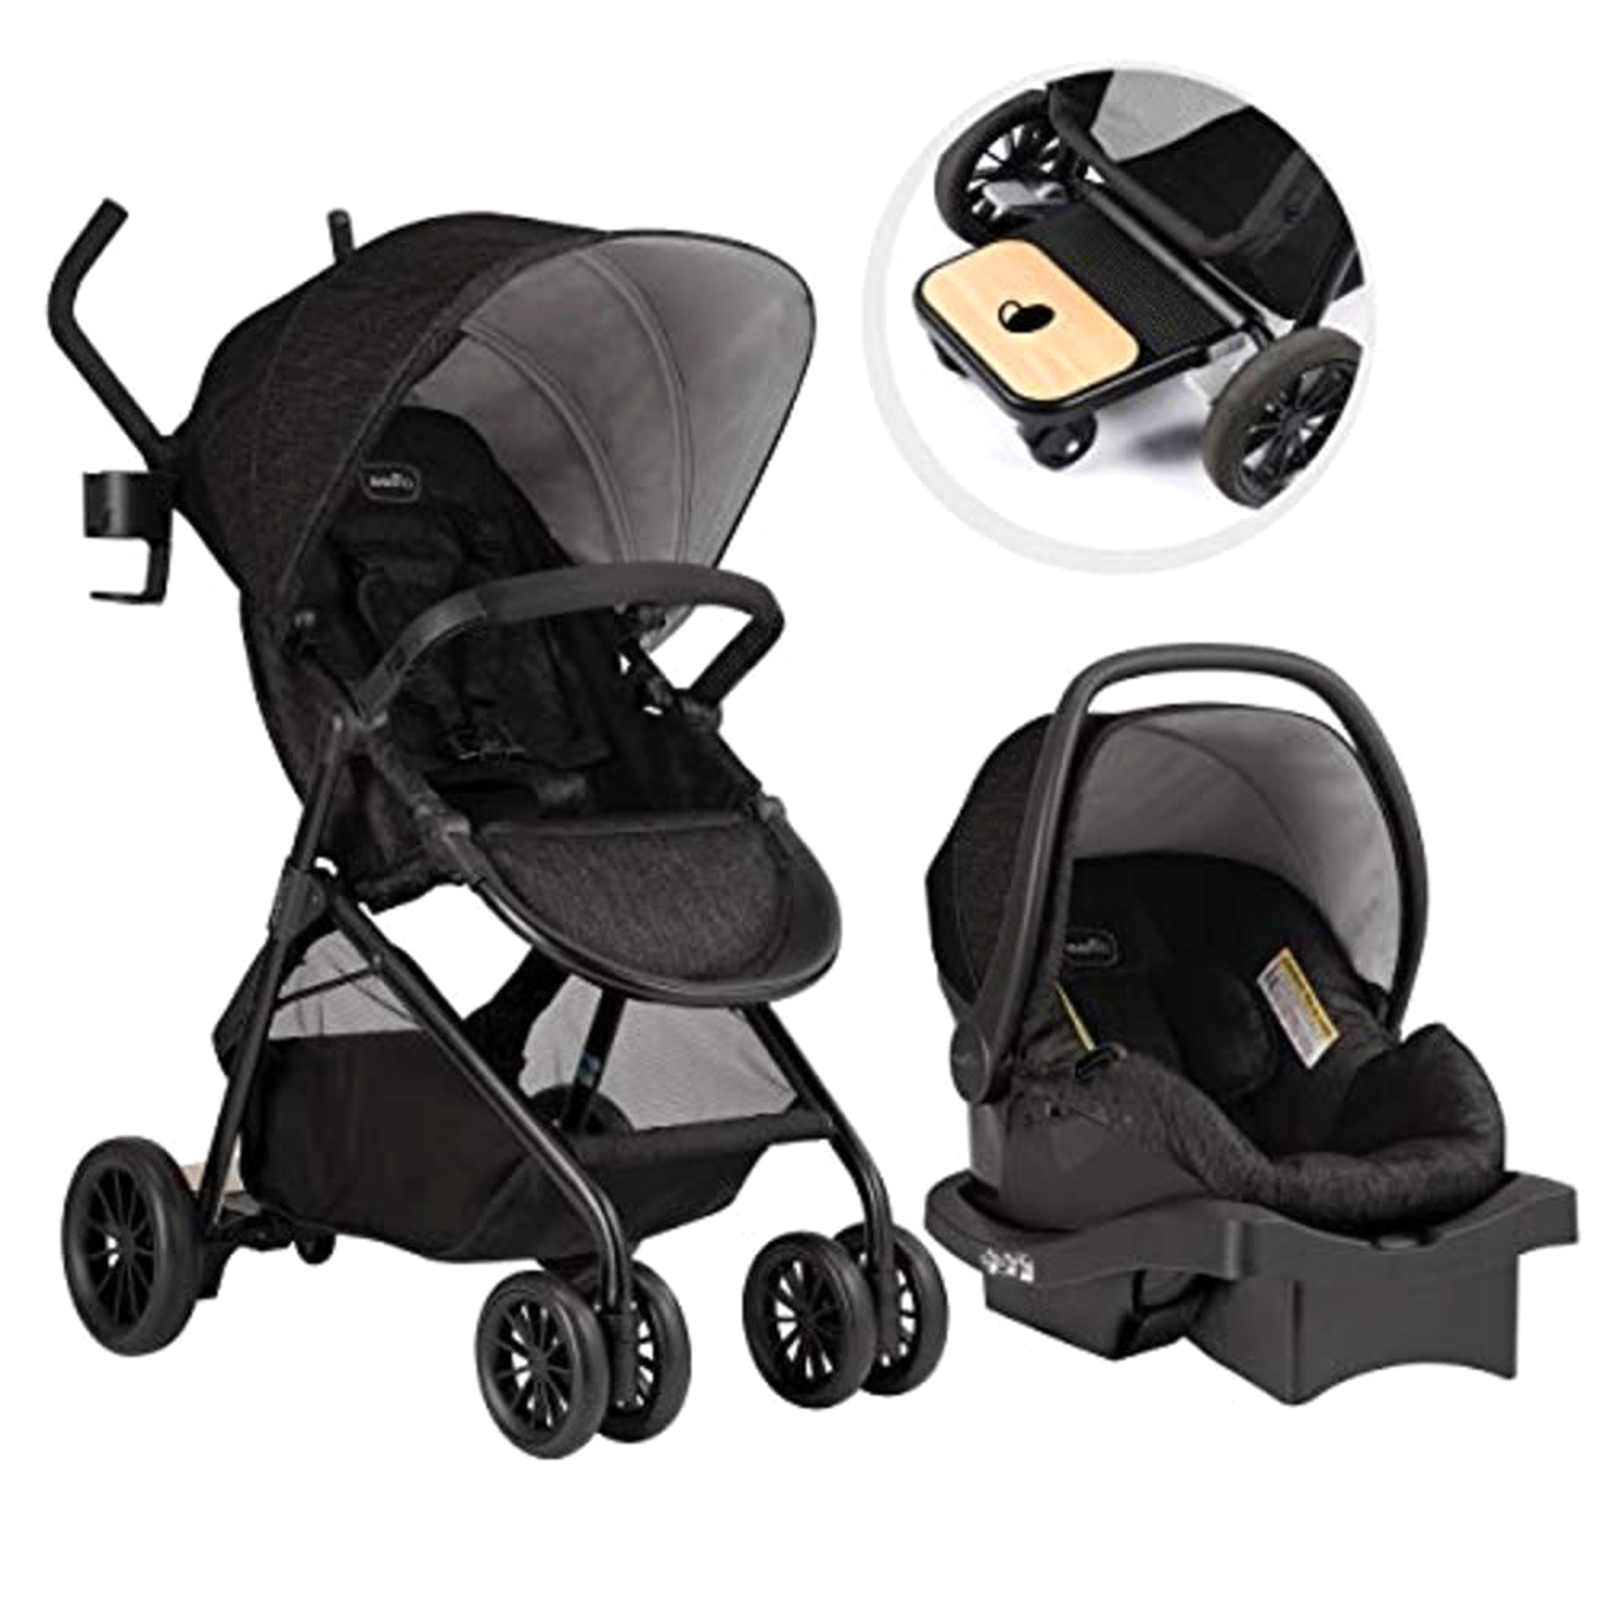 travel system offers